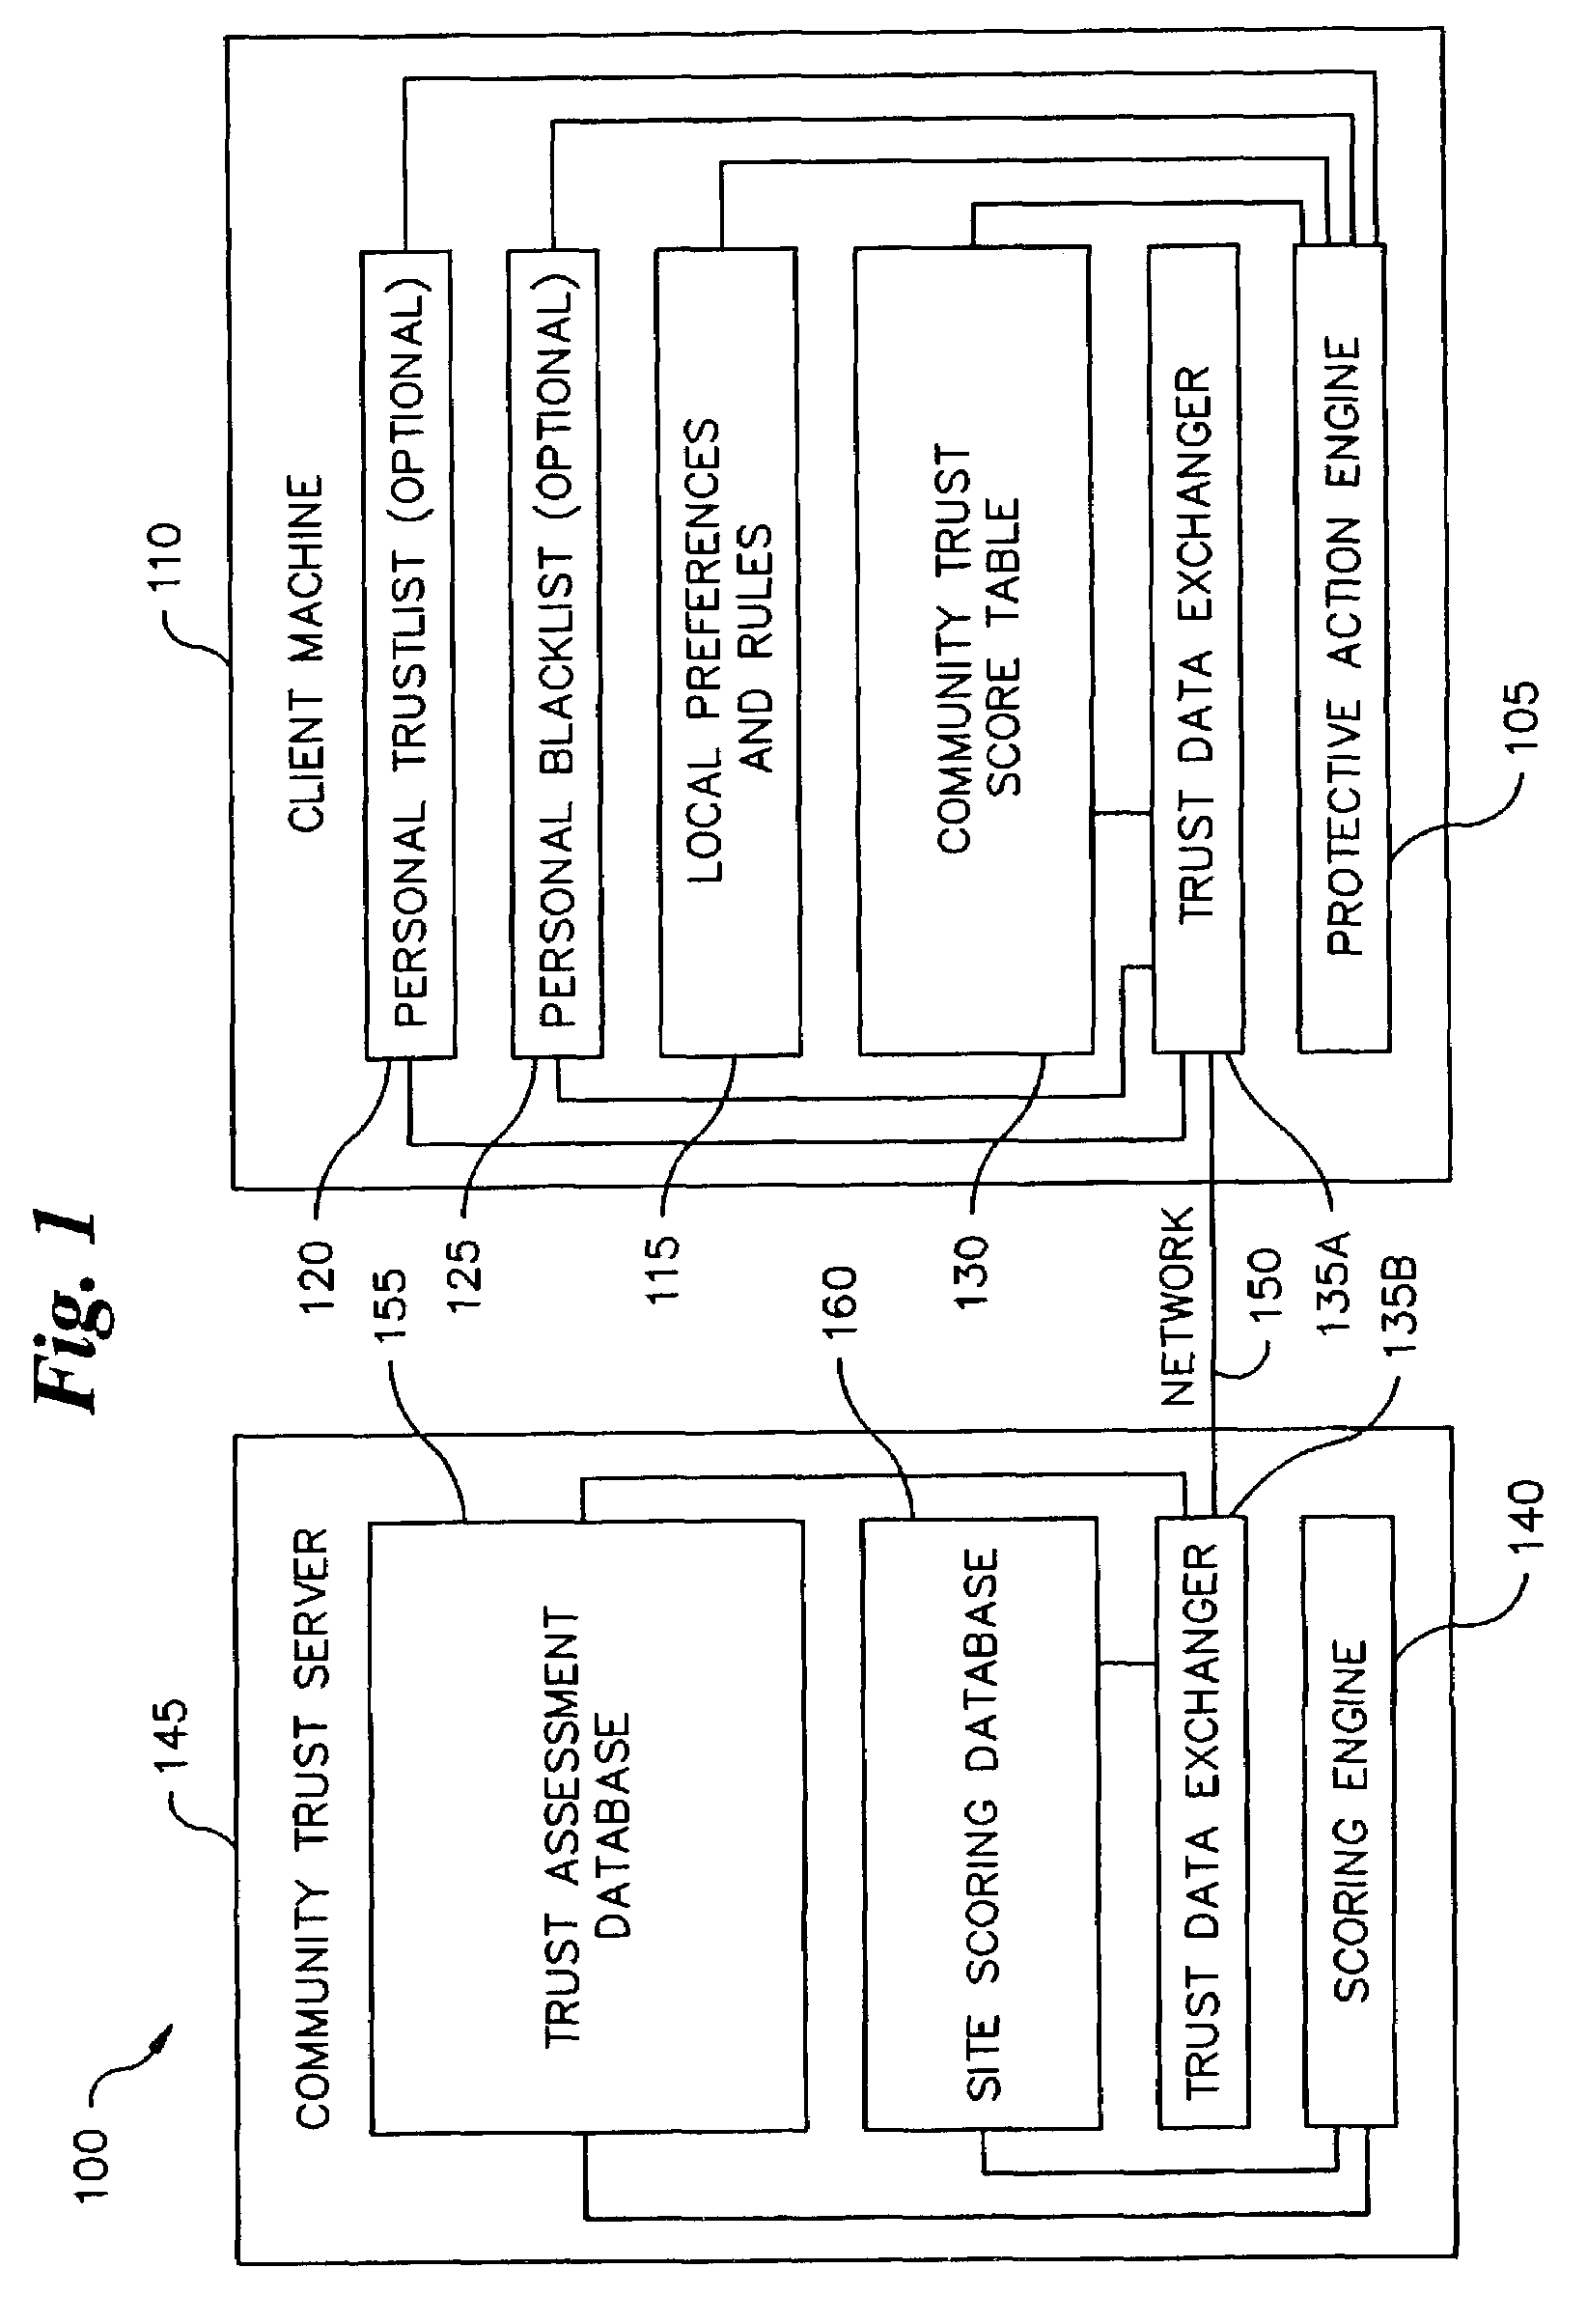 Method and system for screening remote site connections and filtering data based on a community trust assessment